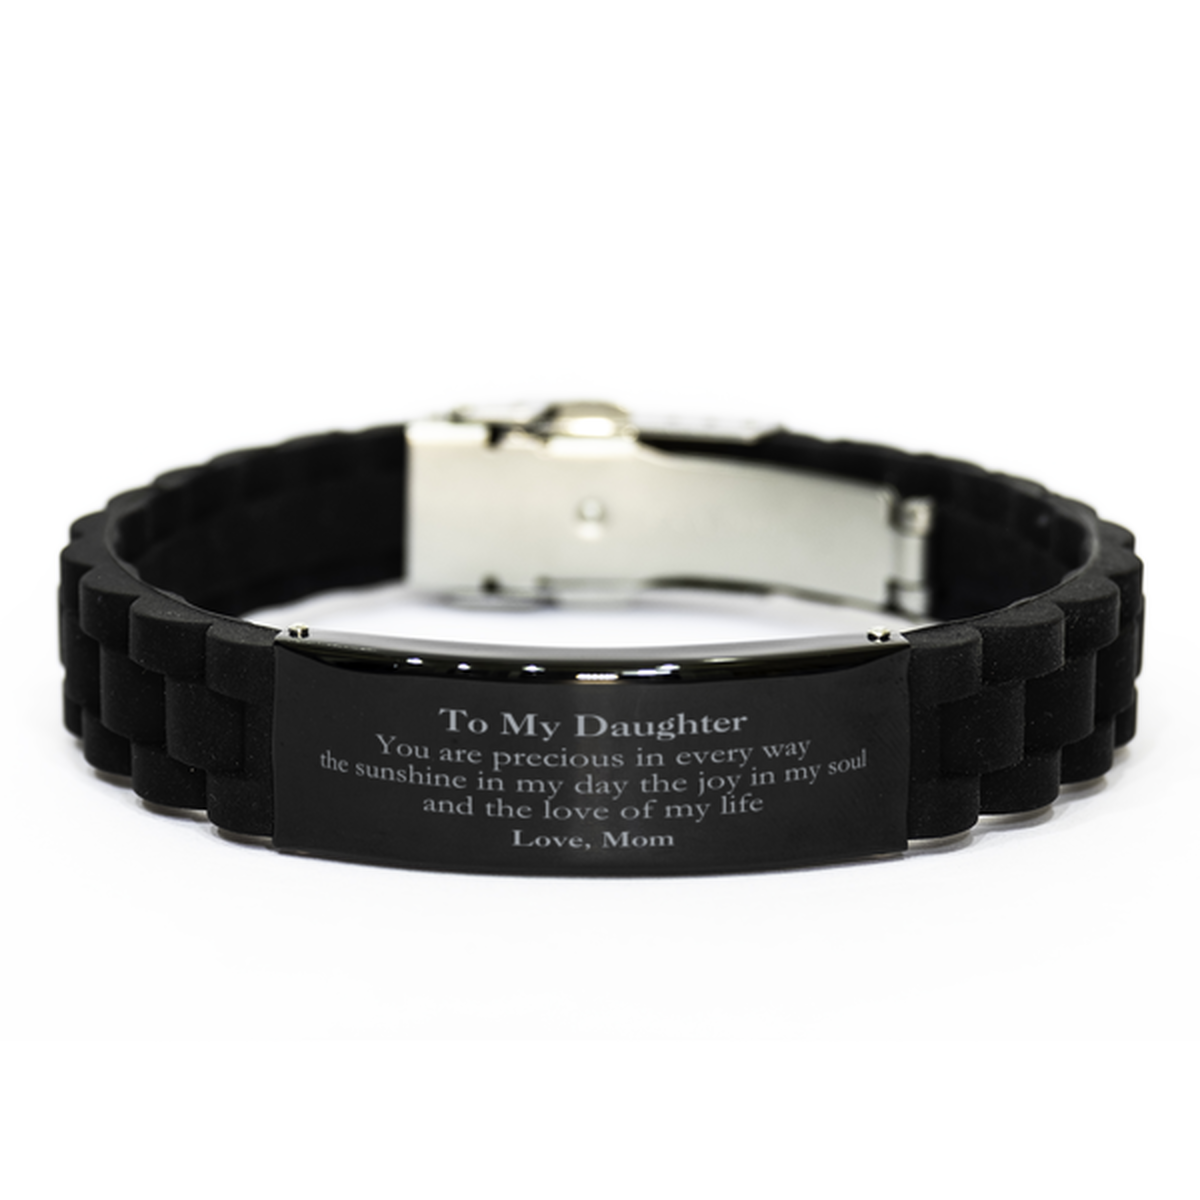 Graduation Gifts for Daughter Black Glidelock Clasp Bracelet Present from Mom, Christmas Daughter Birthday Gifts Daughter You are precious in every way the sunshine in my day. Love, Mom